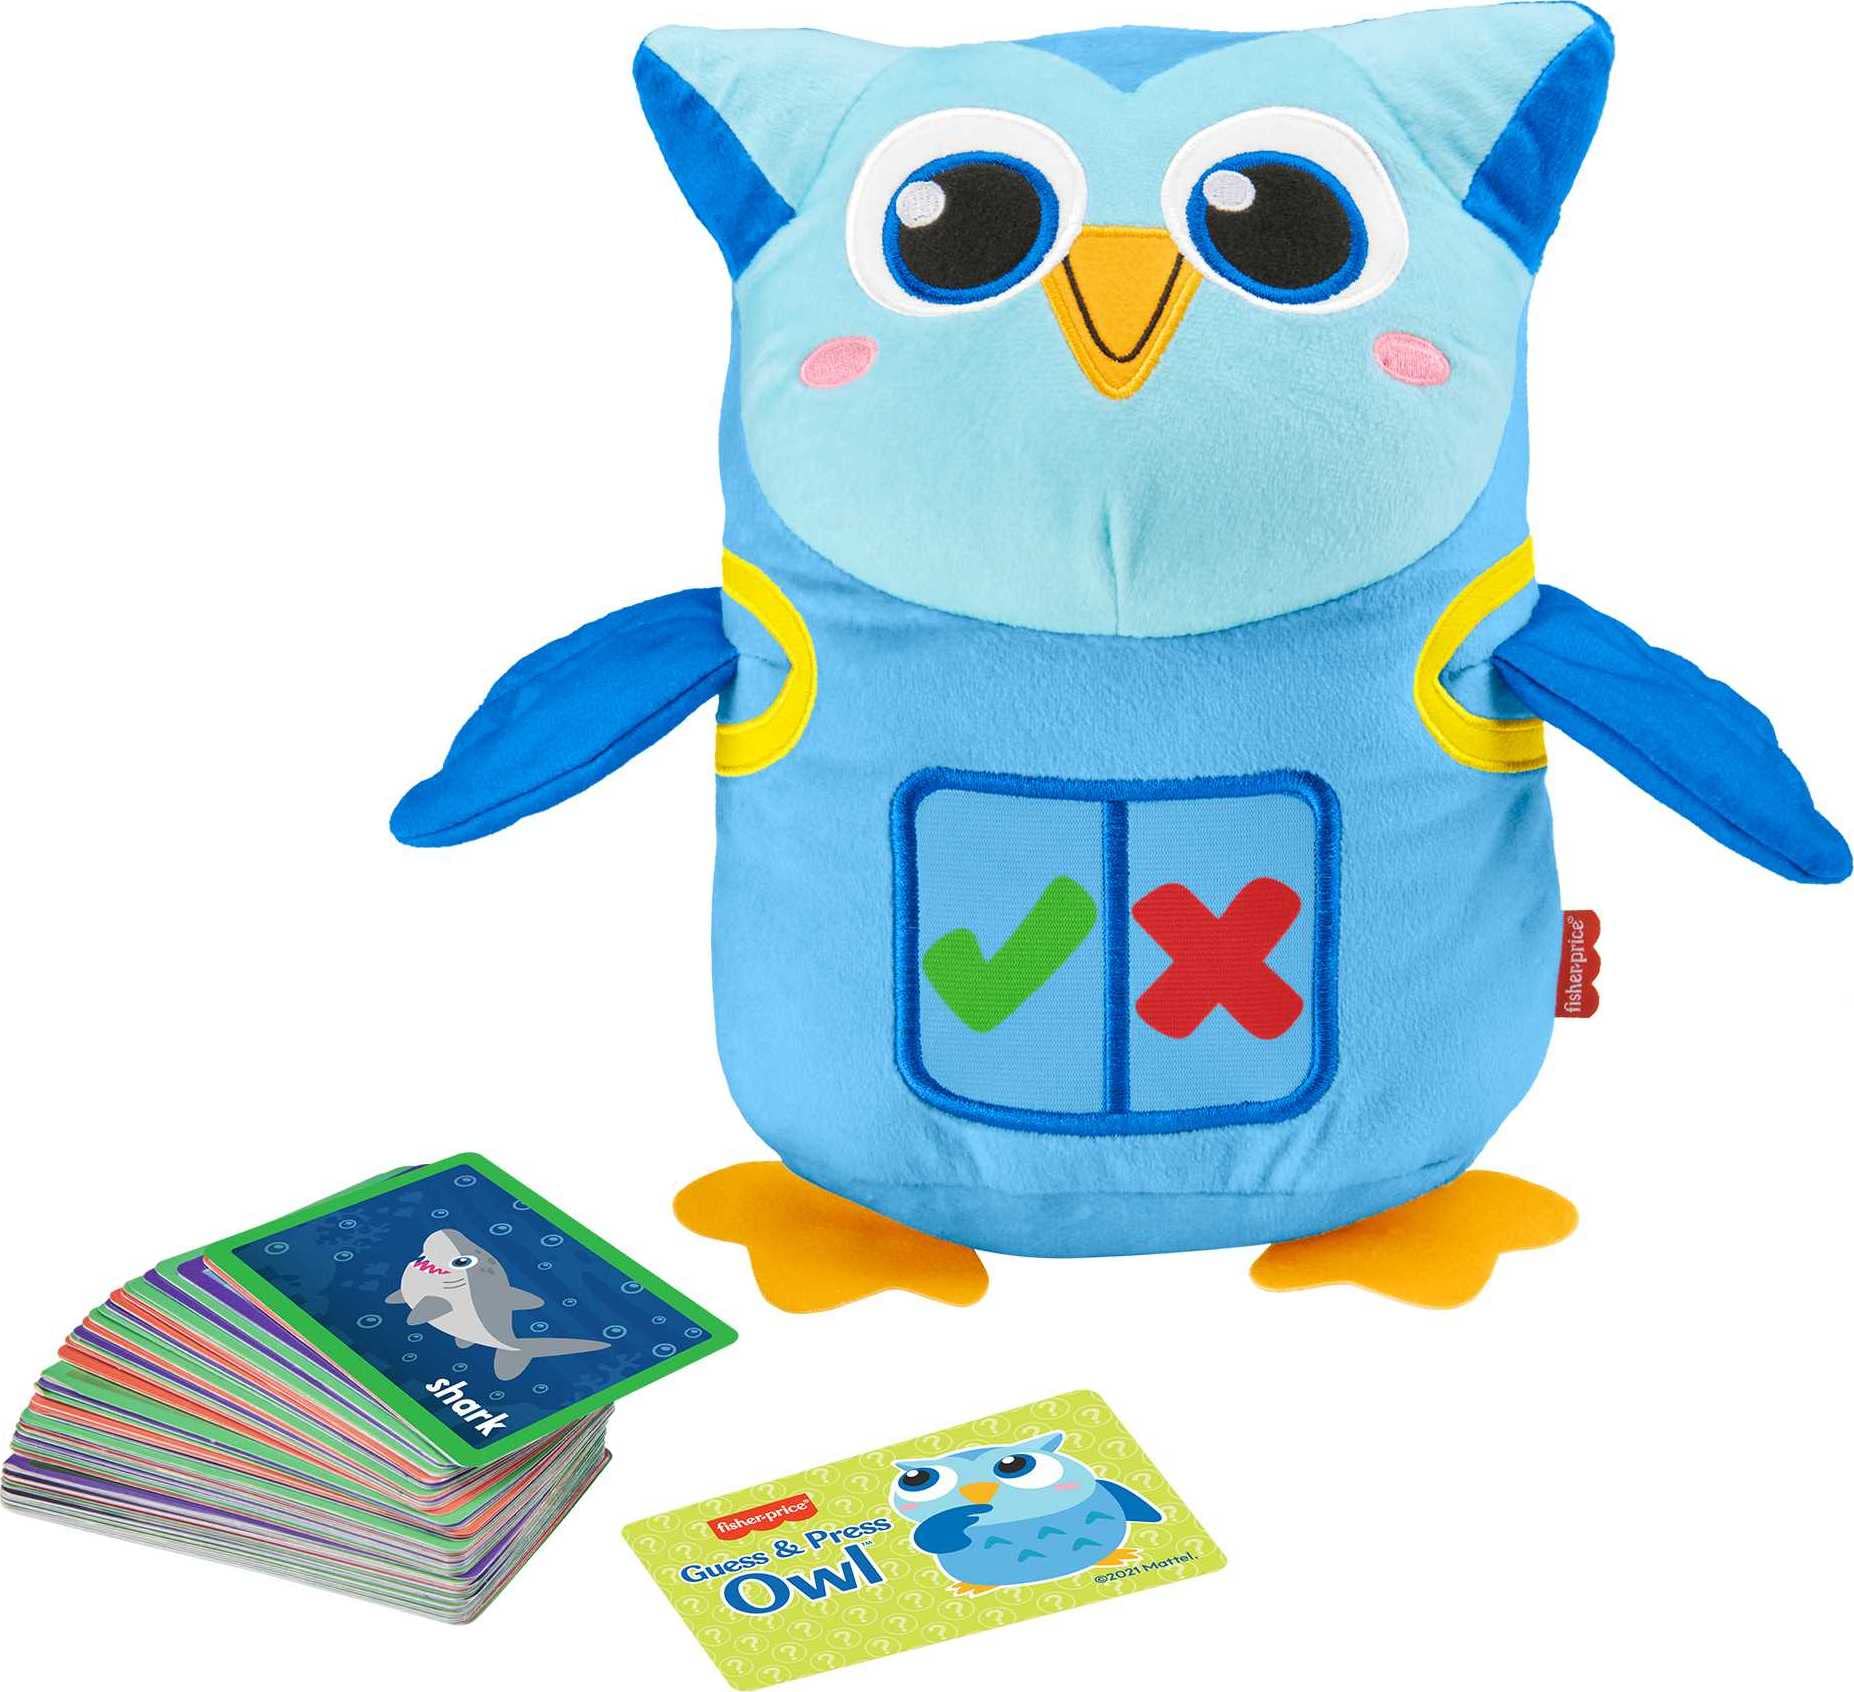 Fisher-Price Preschool Kids' Guess & Press Owl Interactive Plush Electronic Learning Toy $8.63 + Free Shipping w/ Prime or $25+